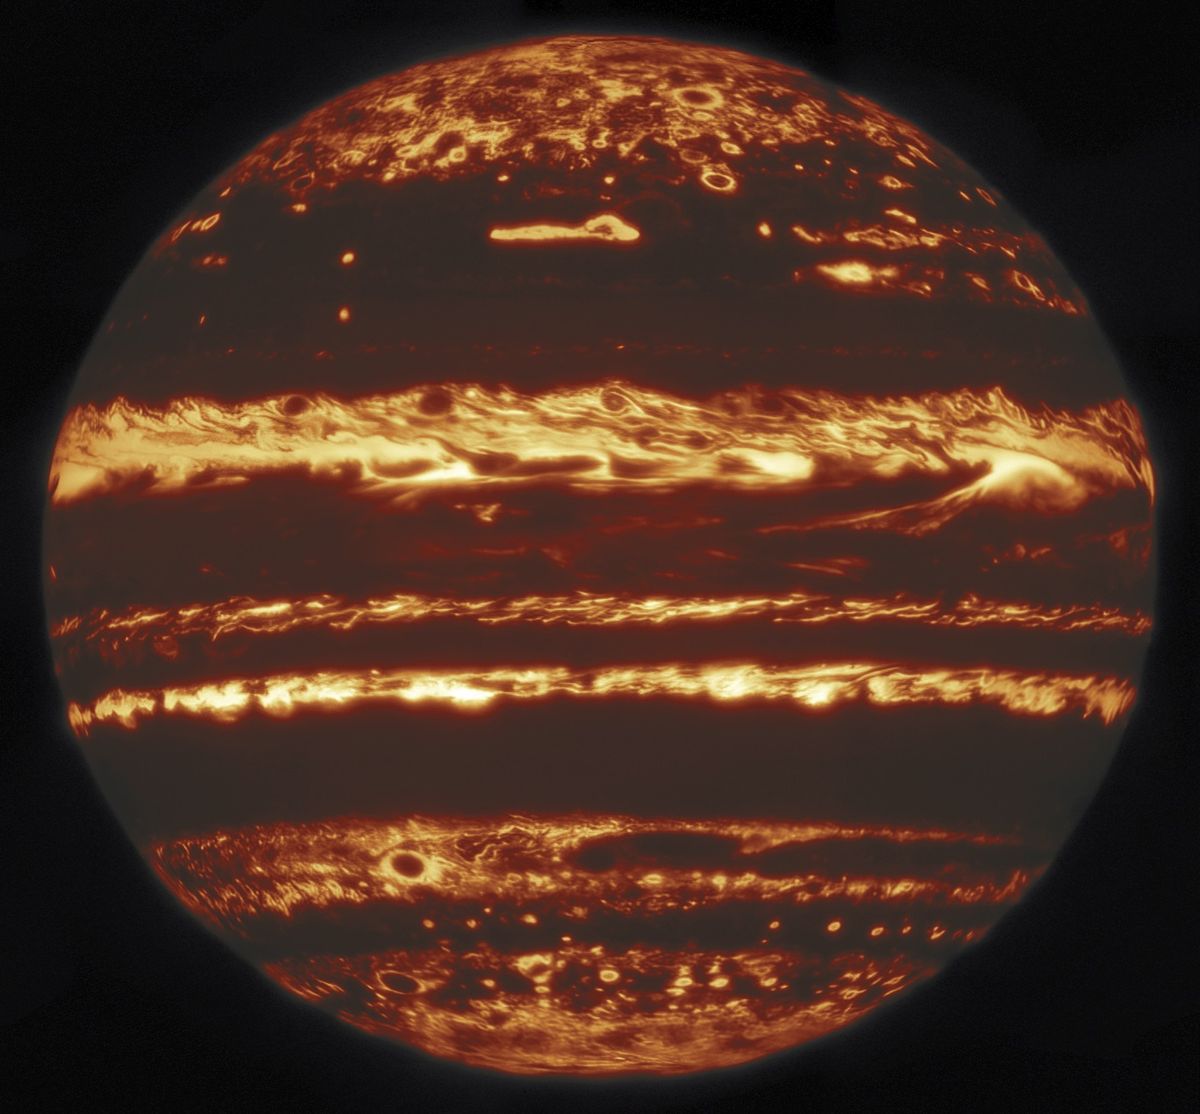 Scientists get their best-ever look at Jupiter's atmosphere and storms - Space.com